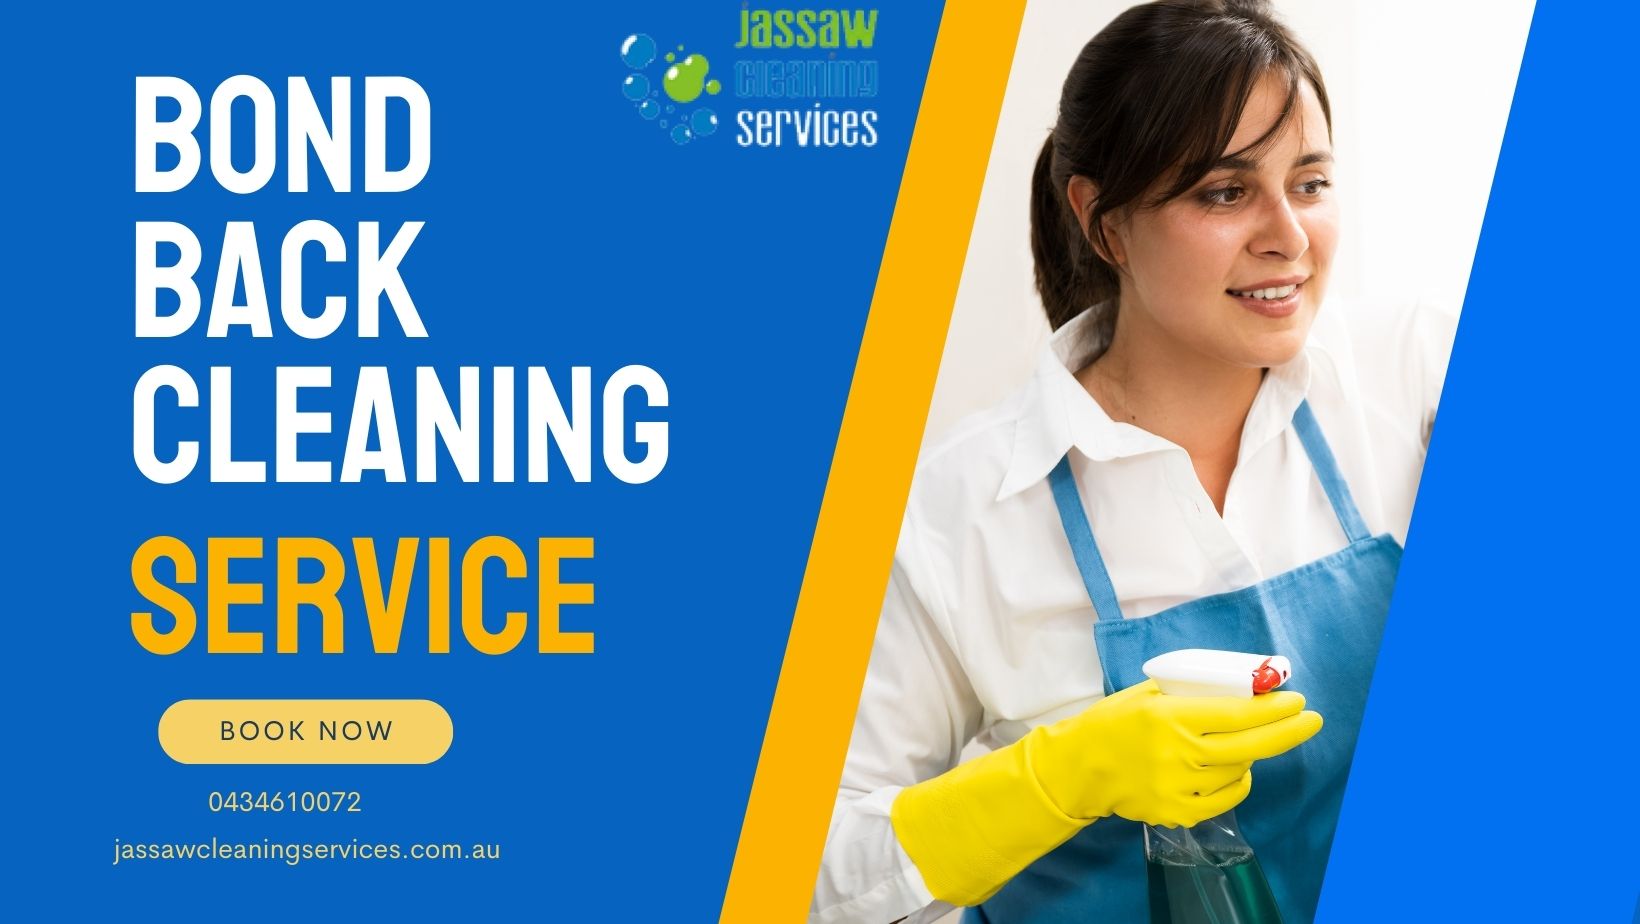  Expert Bond Back Cleaning Service Provider in Canberra and Queanbeyan